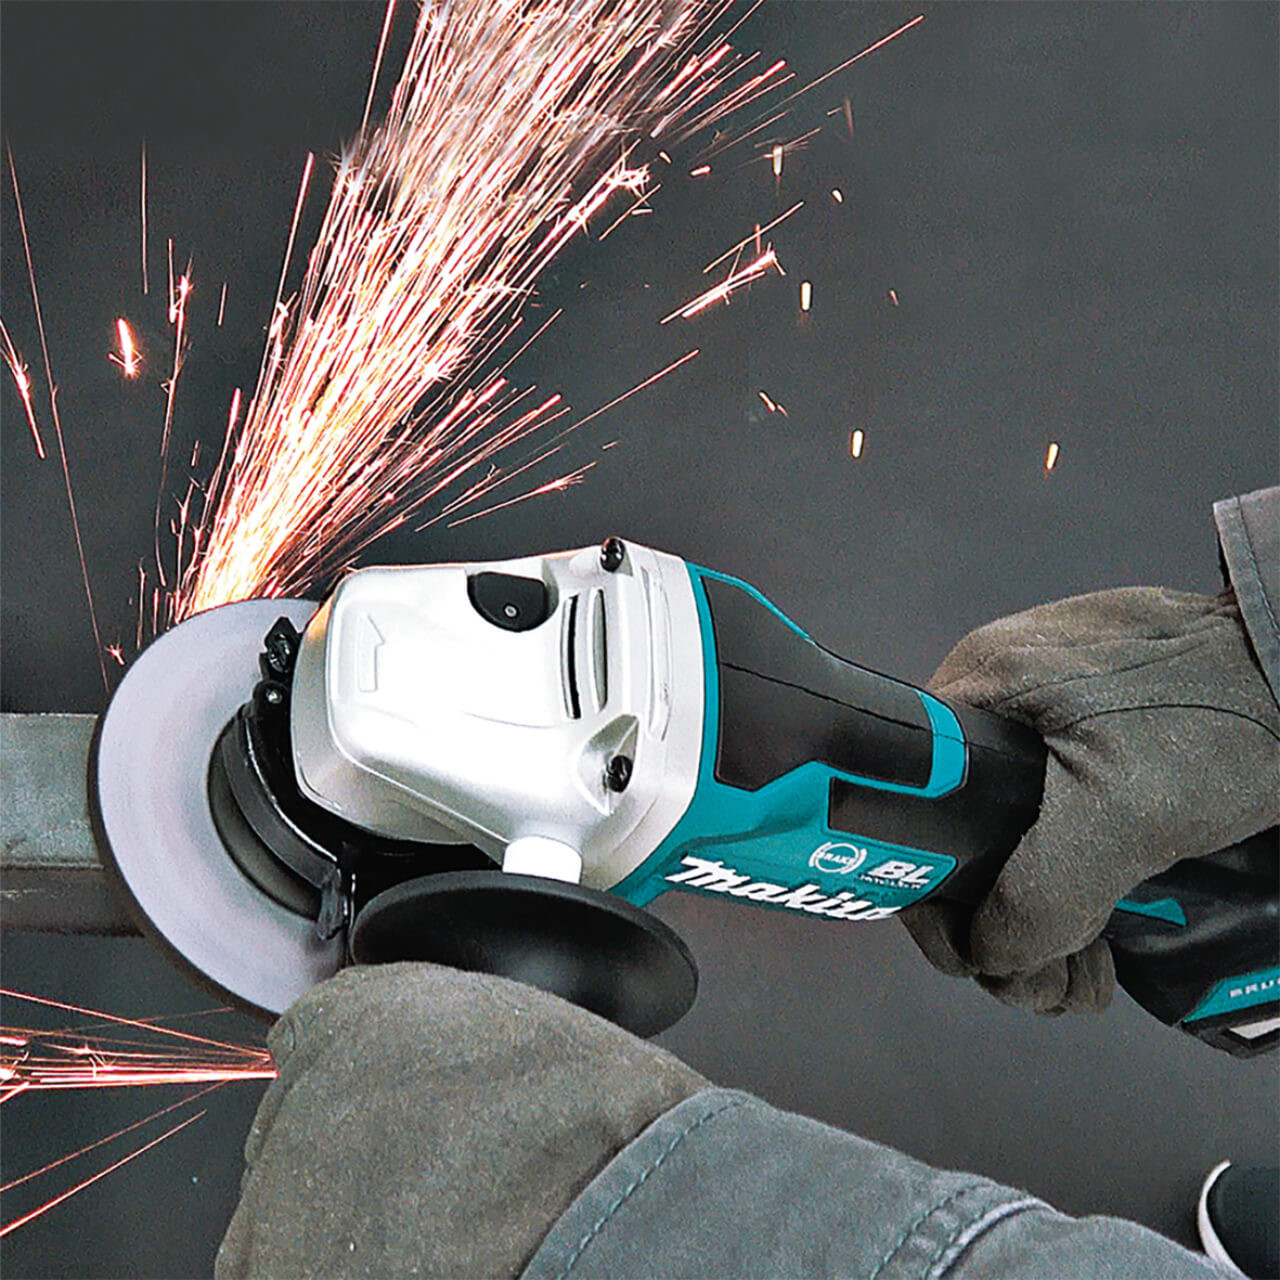 Makita 18V BRUSHLESS AWS 125mm Angle Grinder. Paddle Switch. Variable Speed. Kick Back Detection. Electric Brake - Tool Only